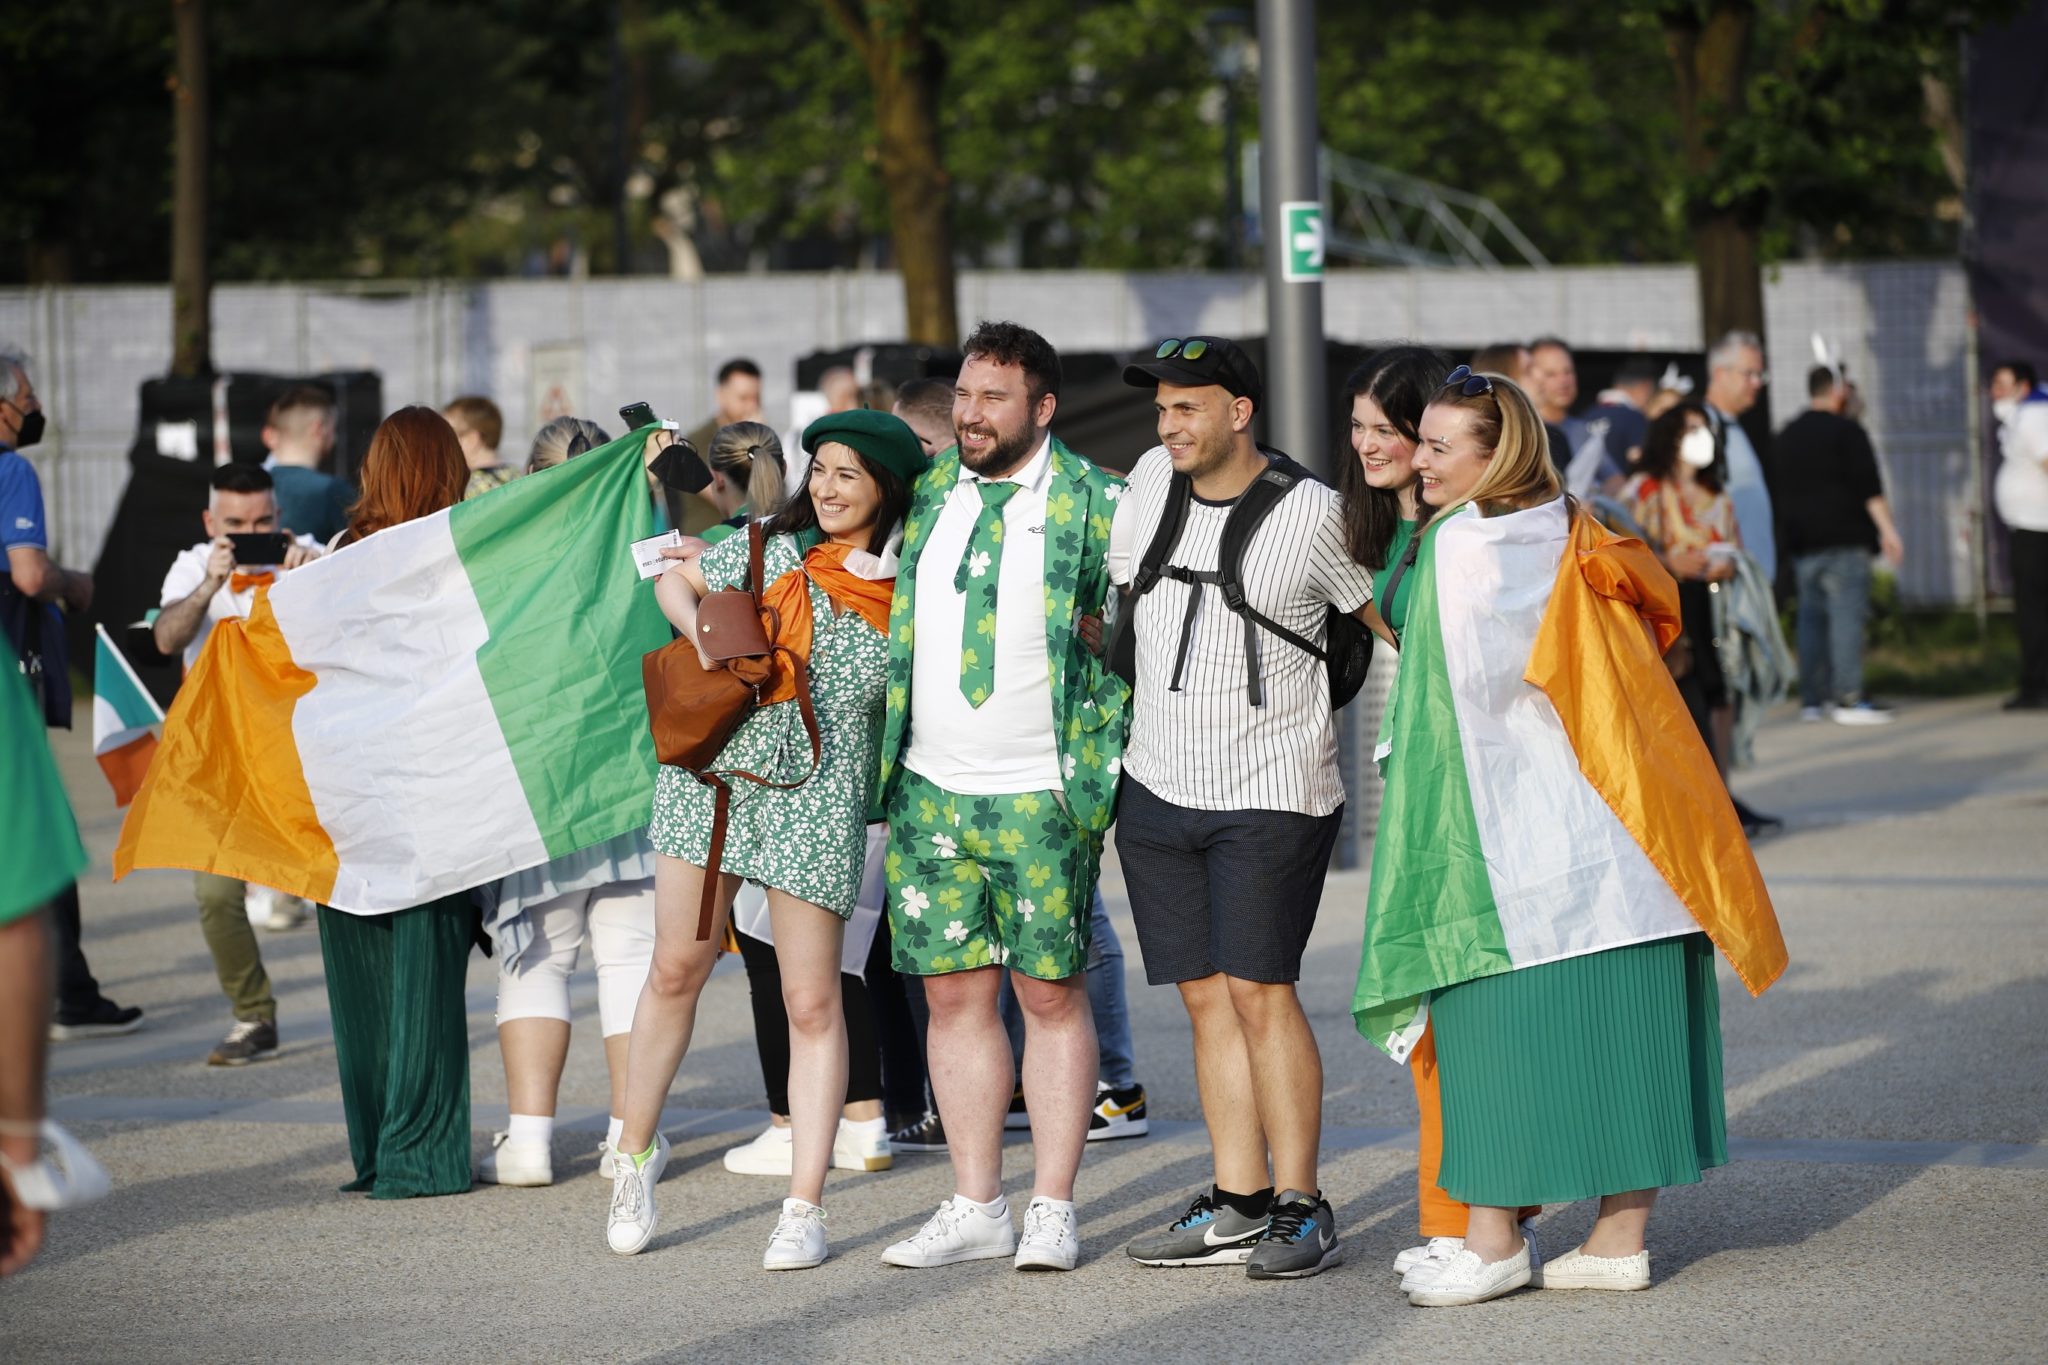 Excited fans ahead of the second Eurovision 2022 semi-final in Turin, Italy